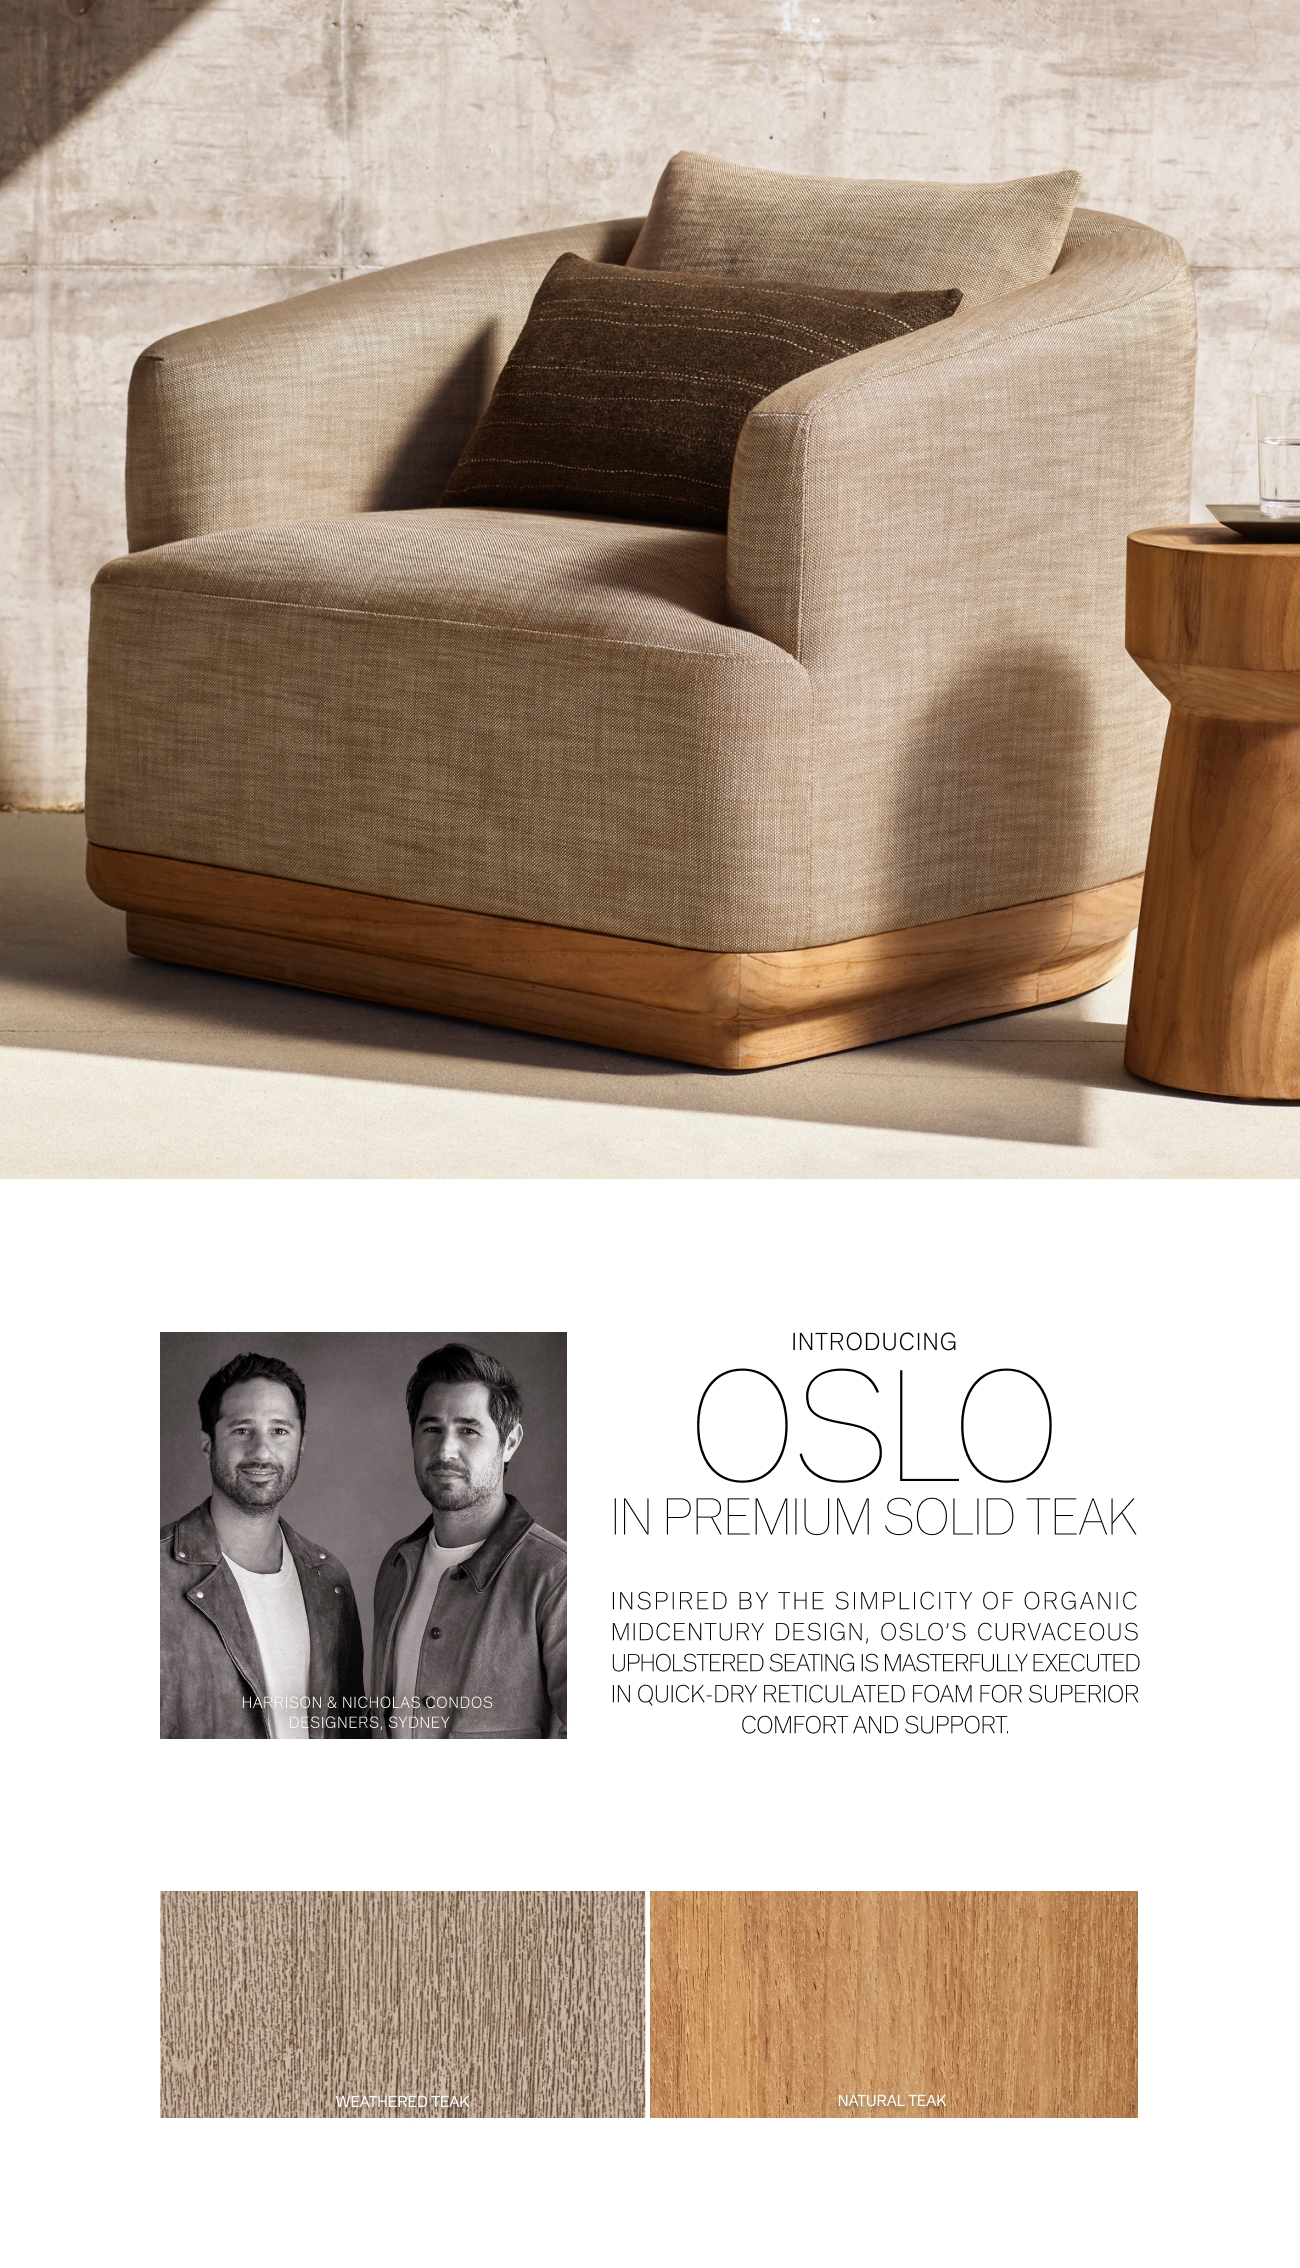  INTRODUCING OoLO IN PREMIUM SOLID TEAK INSPIRED BY THE SIMPLICITY OF ORGANIC MIDCENTURY DESIGN, OSLOS CURVACEOUS UPHOLSTERED SEATING IS MASTERFULLY EXECUTED IN QUICK-DRY RETICULATED FOAM FOR SUPERIOR COMFORT AND SUPPORT. 